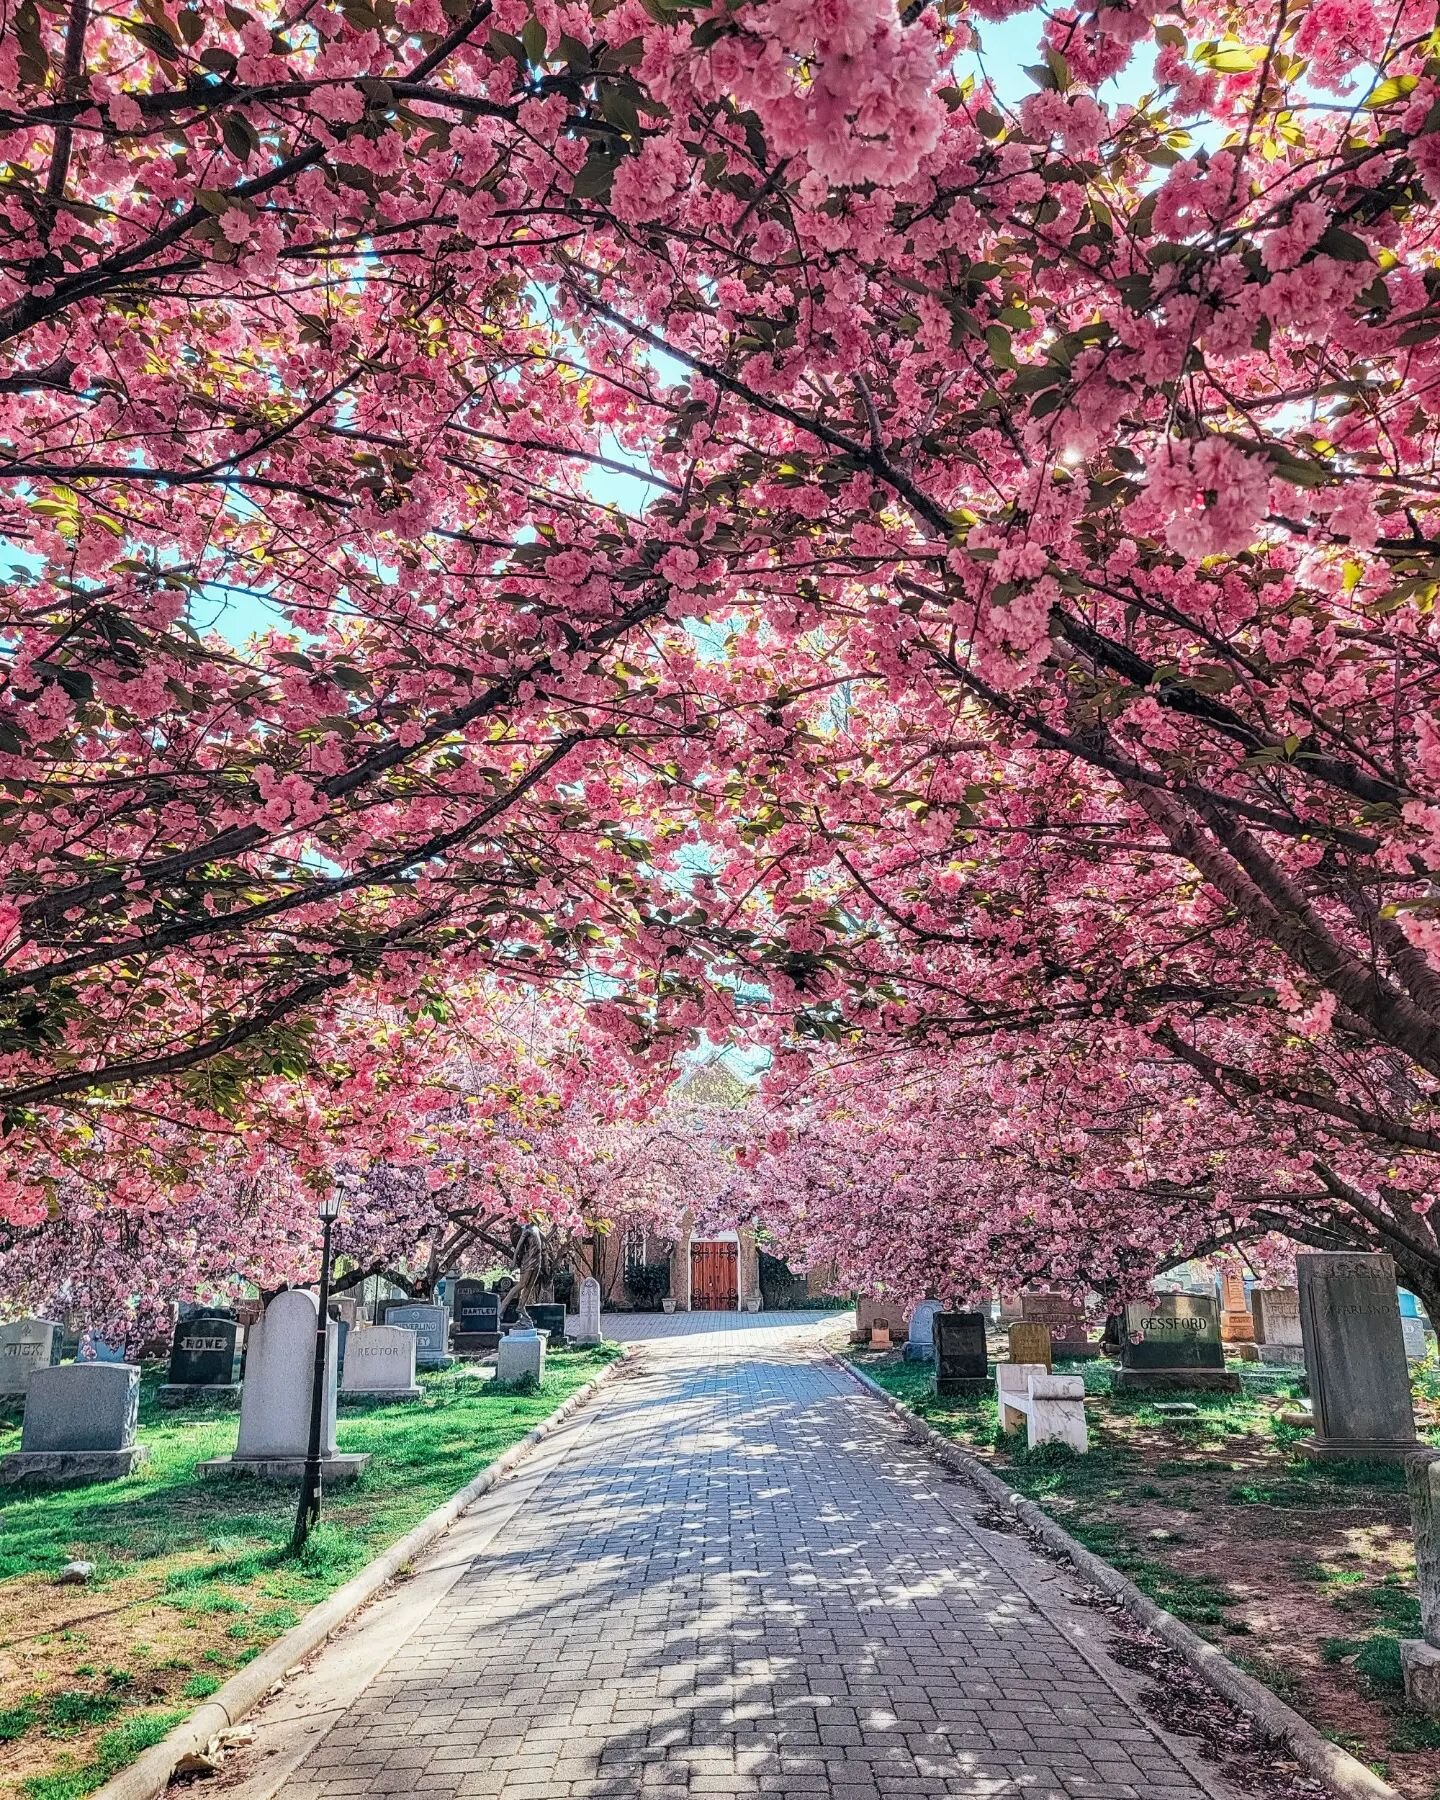 Congressional Cemetery strikes again! This time with Kwanzan blossoms 🌸 

While part of the walkways are lined with Okame Cherry Blossoms early in the spring, there are a HUGE number of Kwanzan Blossoms lining even more of them. All about pretty in 